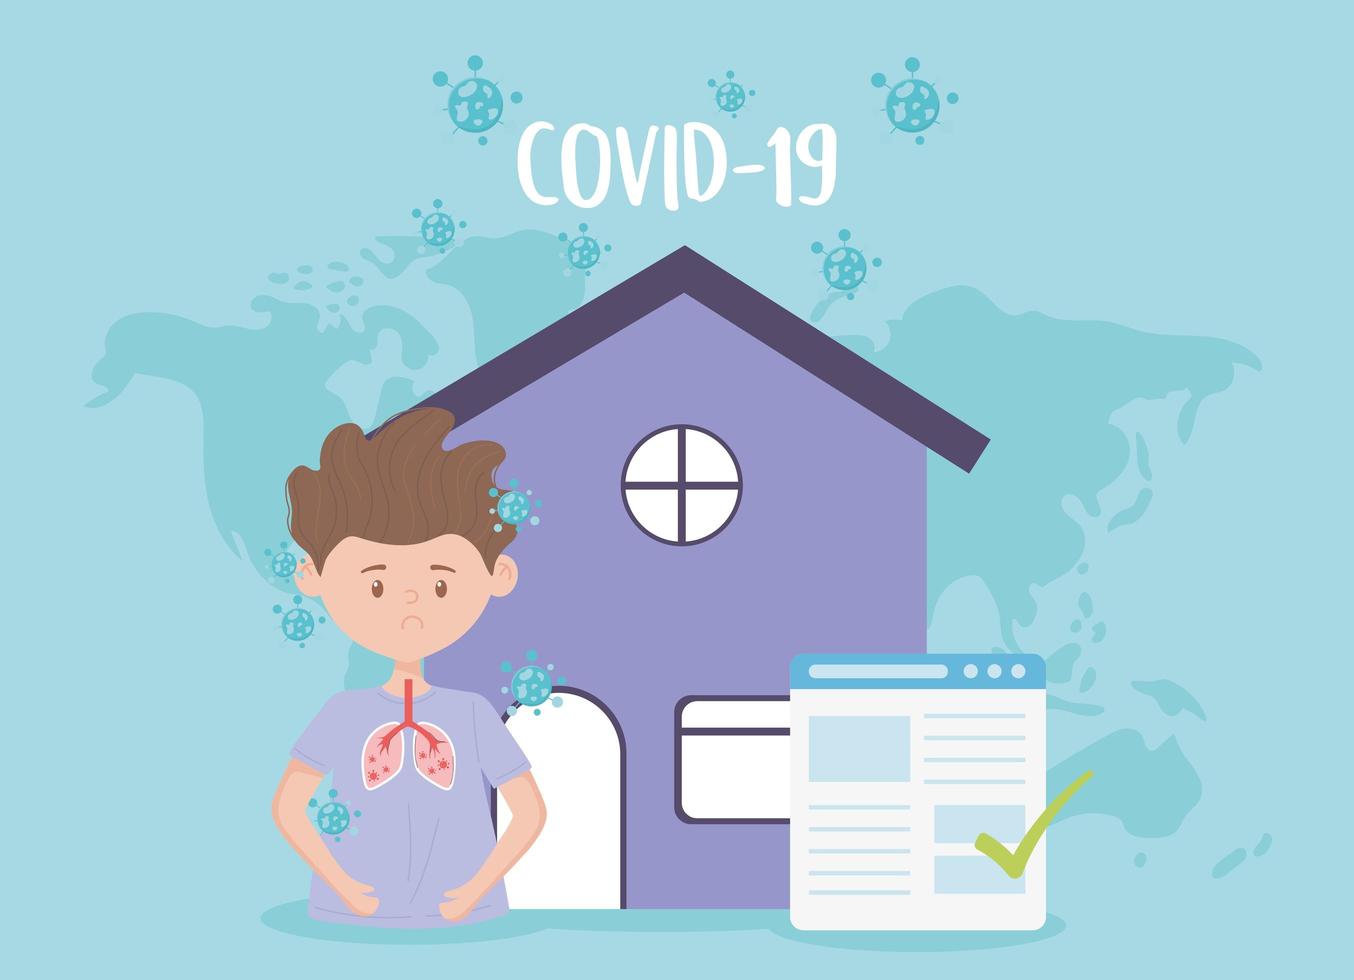 Man with Covid-19 symptoms banner vector